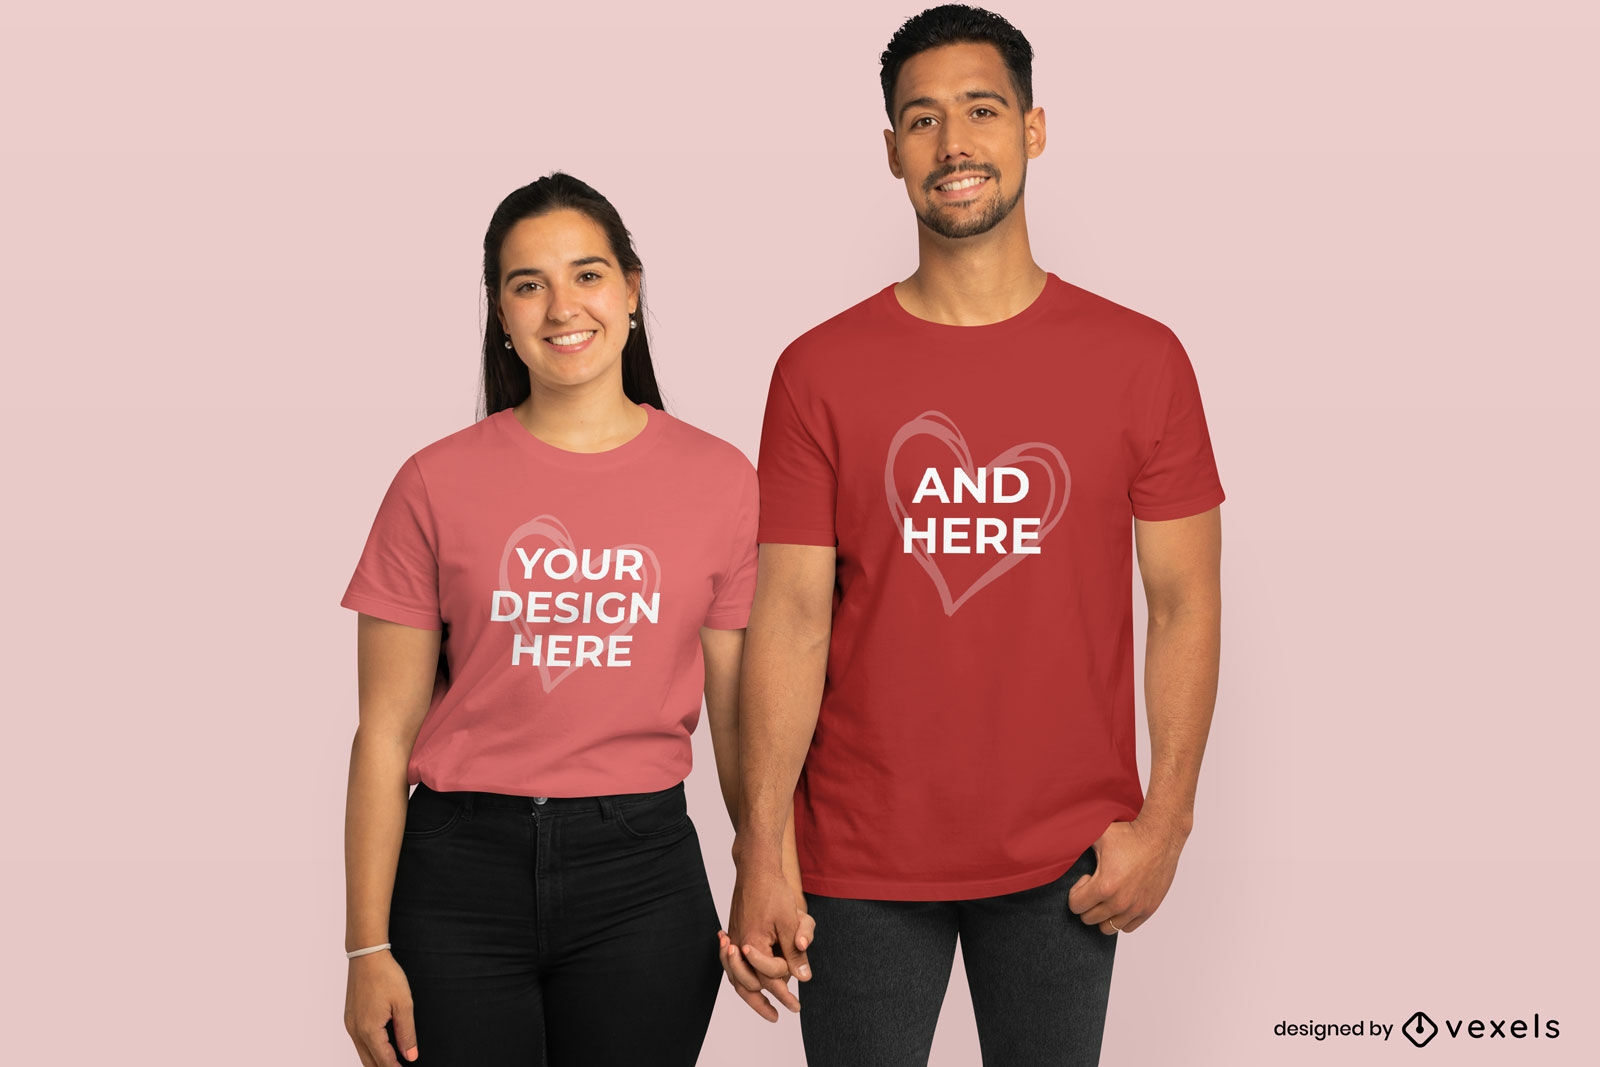 Lovers holding hands t-shirt mockup